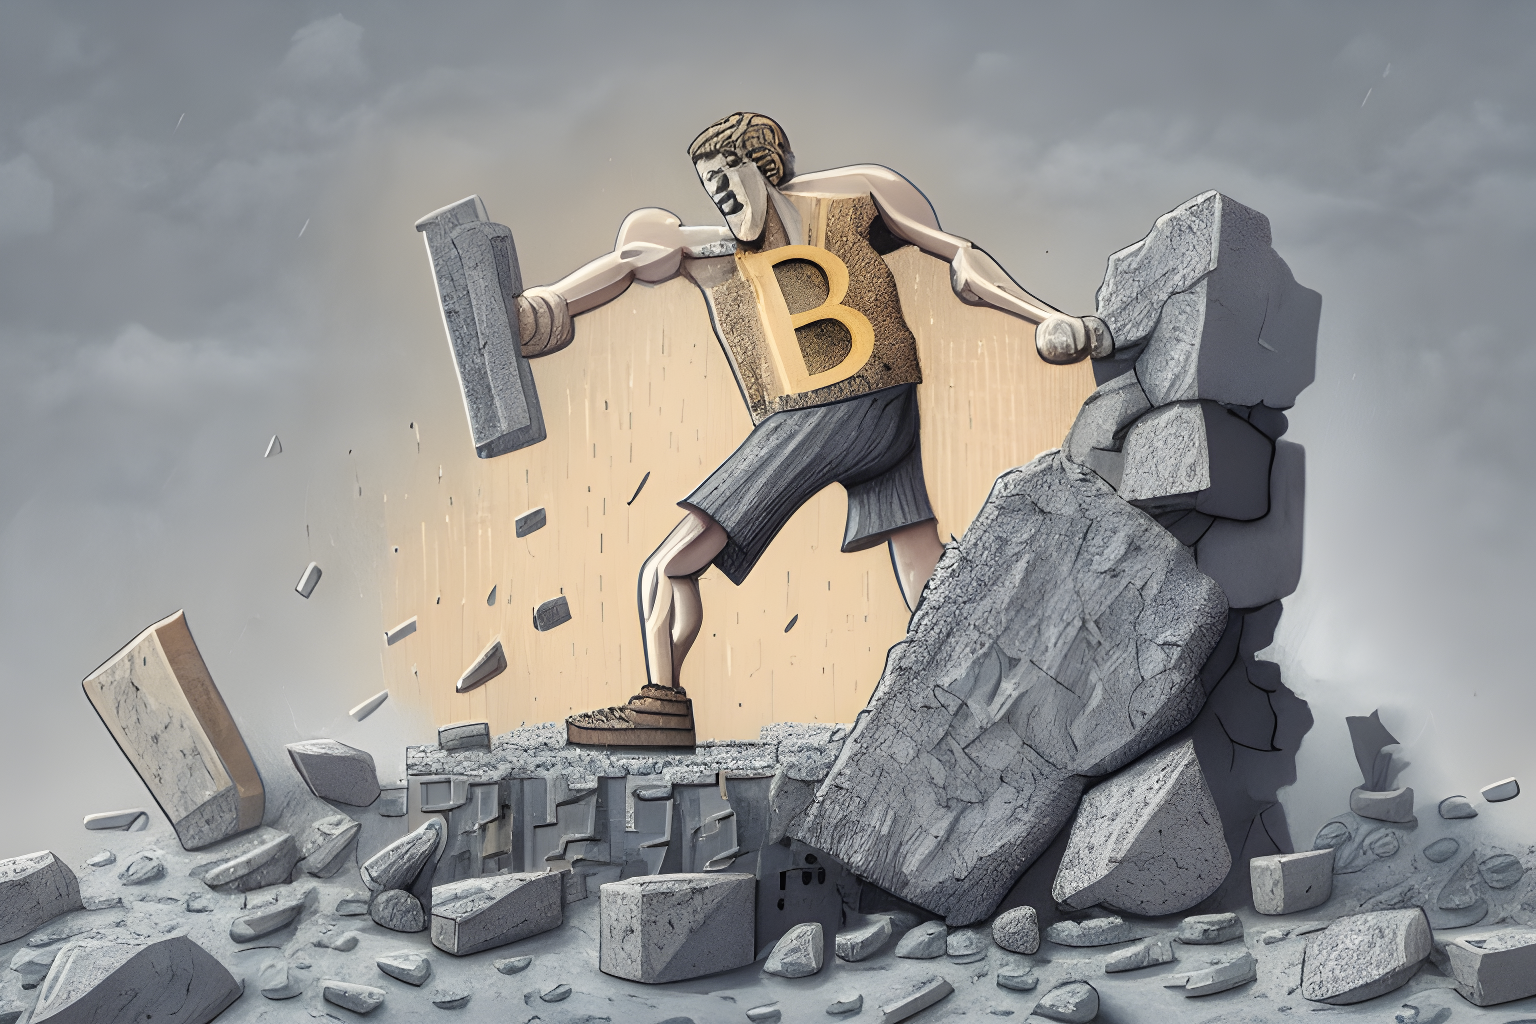 Illustrate a humanoid bitcoin token standing on rubble with a hammer in hand